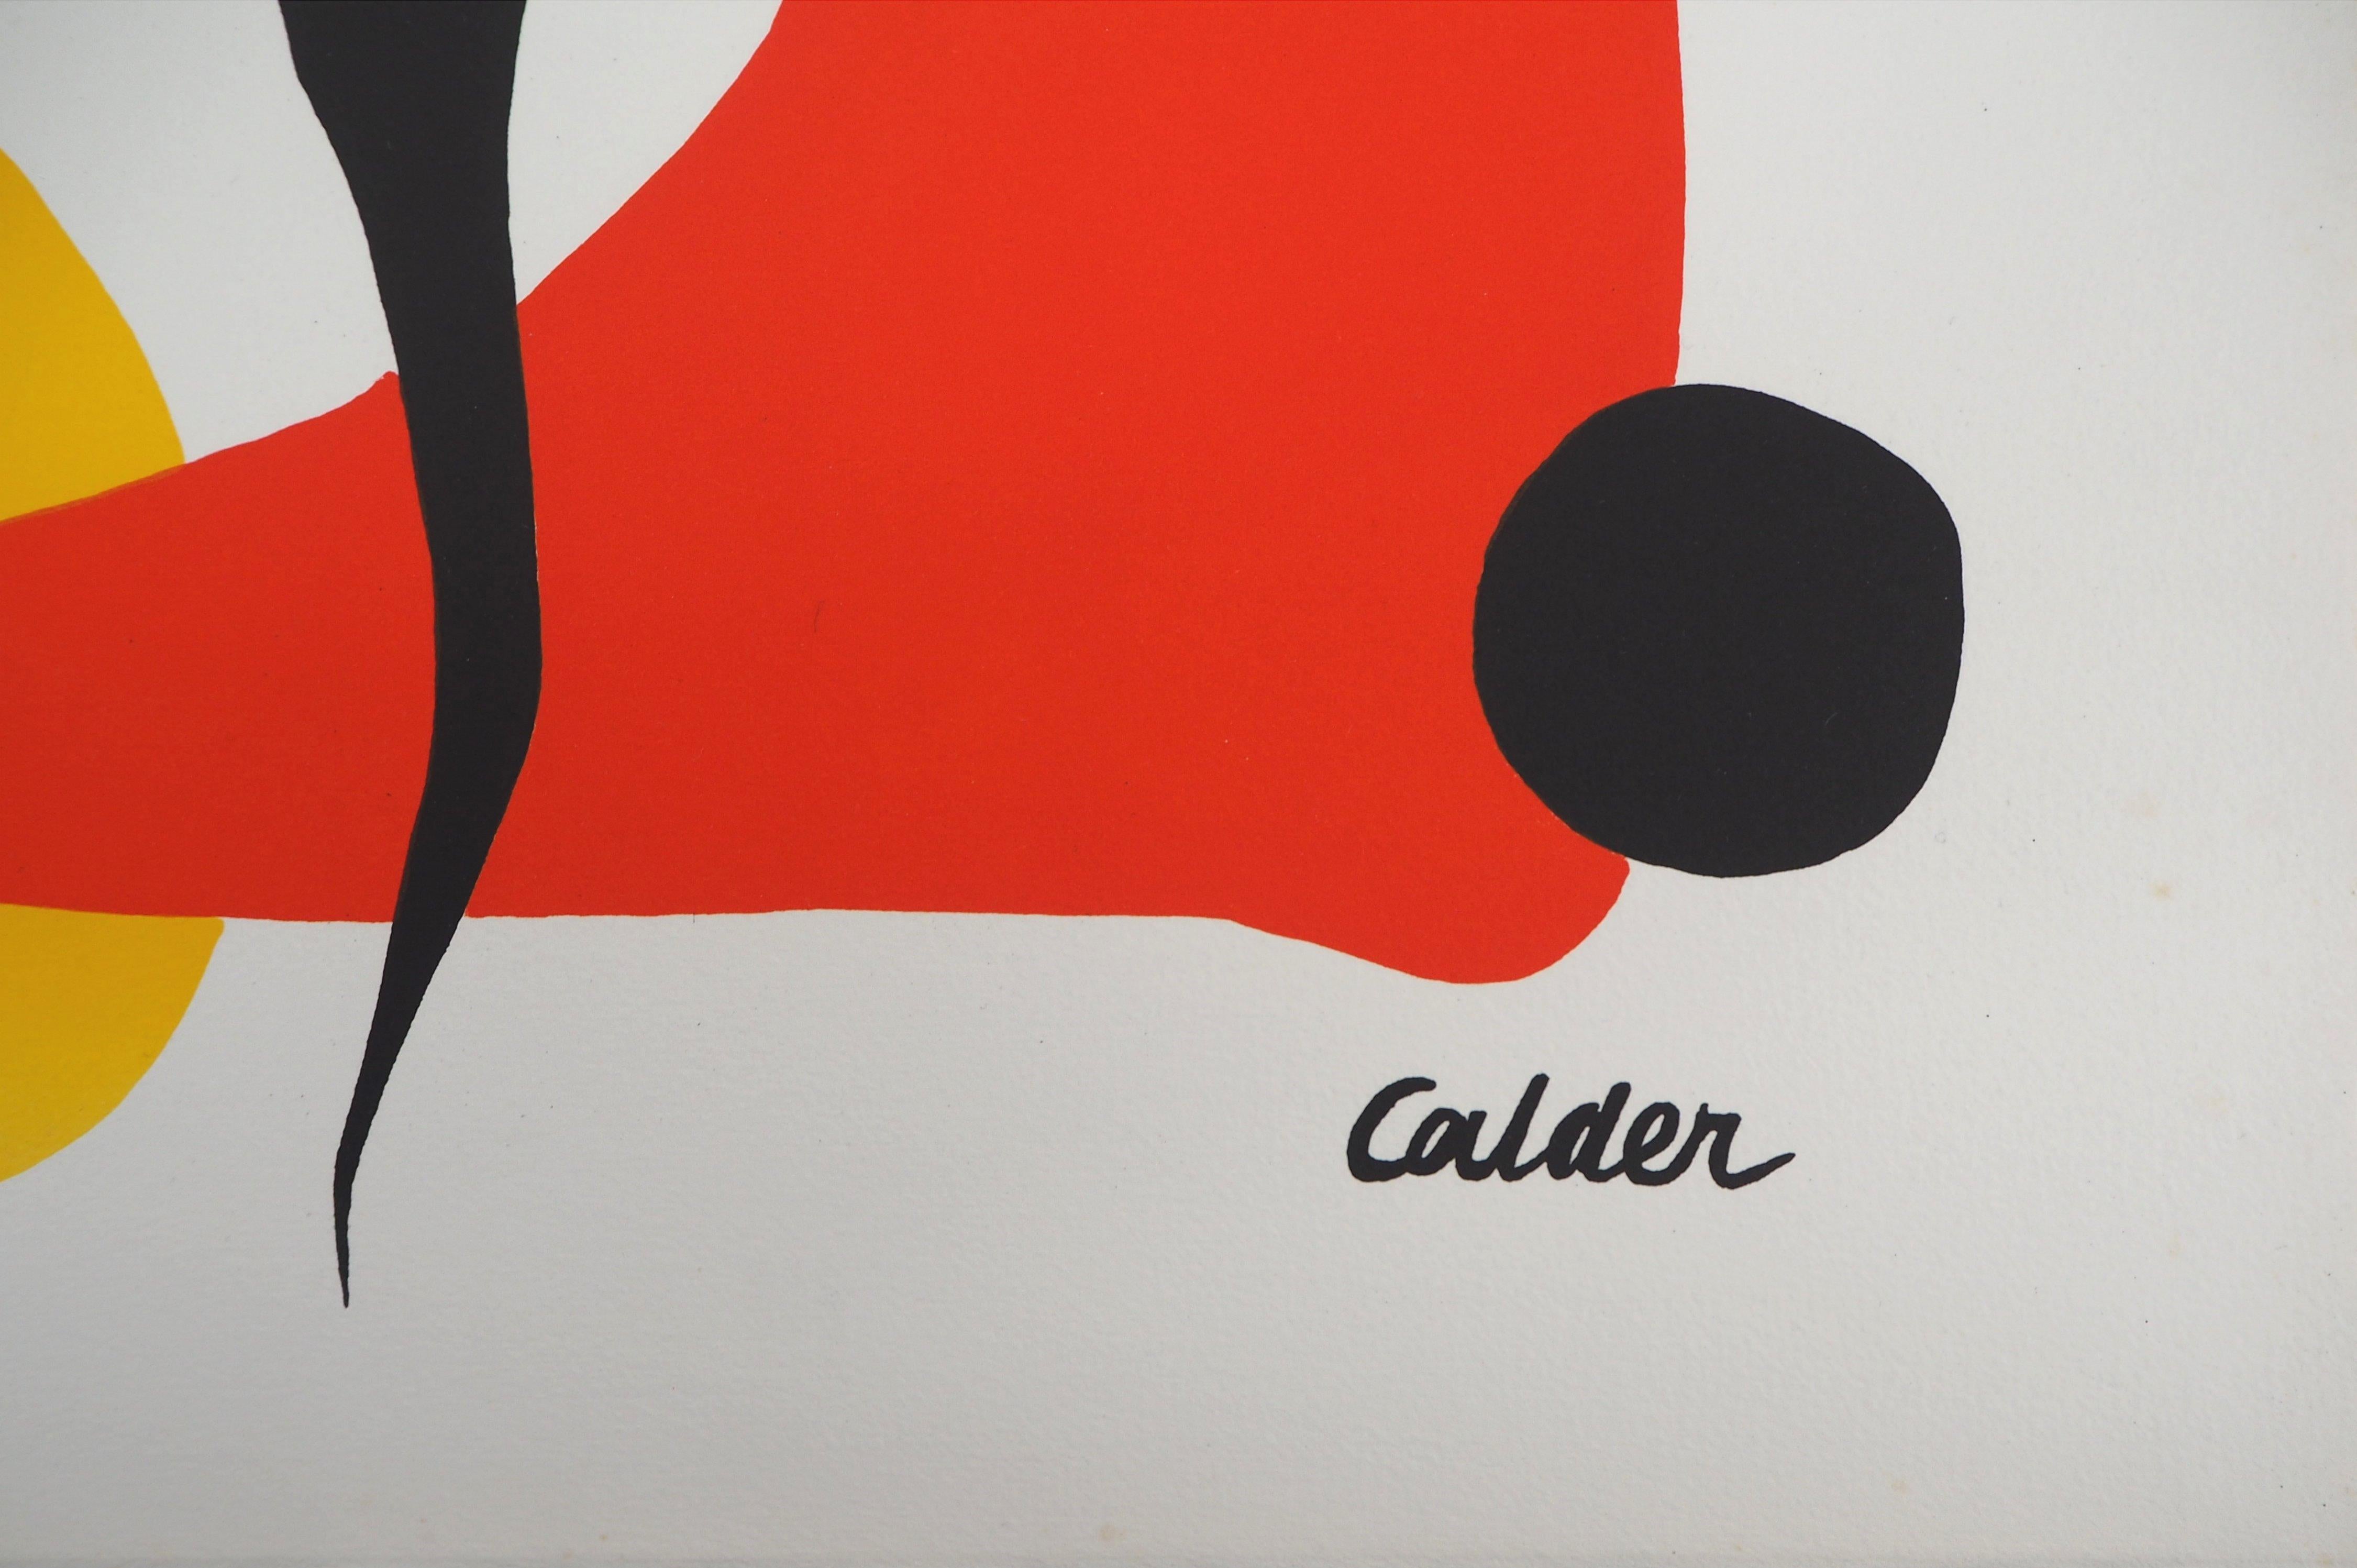 Circles and triangle - Original signed lithograph - Gray Abstract Print by Alexander Calder